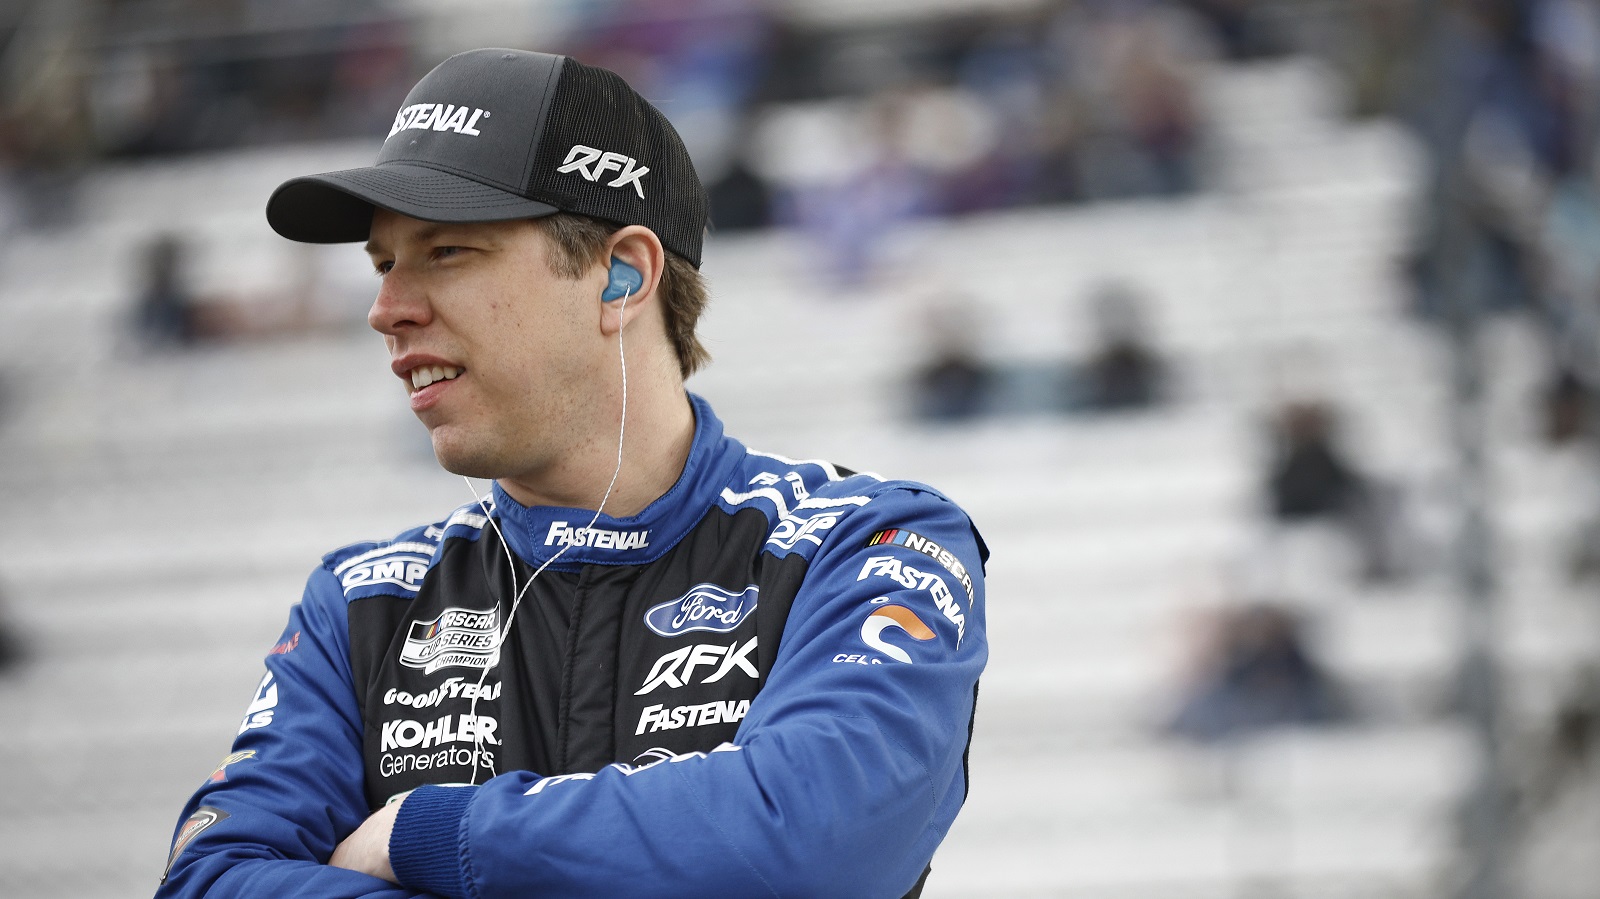 Brad Keselowski Has the Most to Gain or Lose From NASCAR’s Return to Talladega